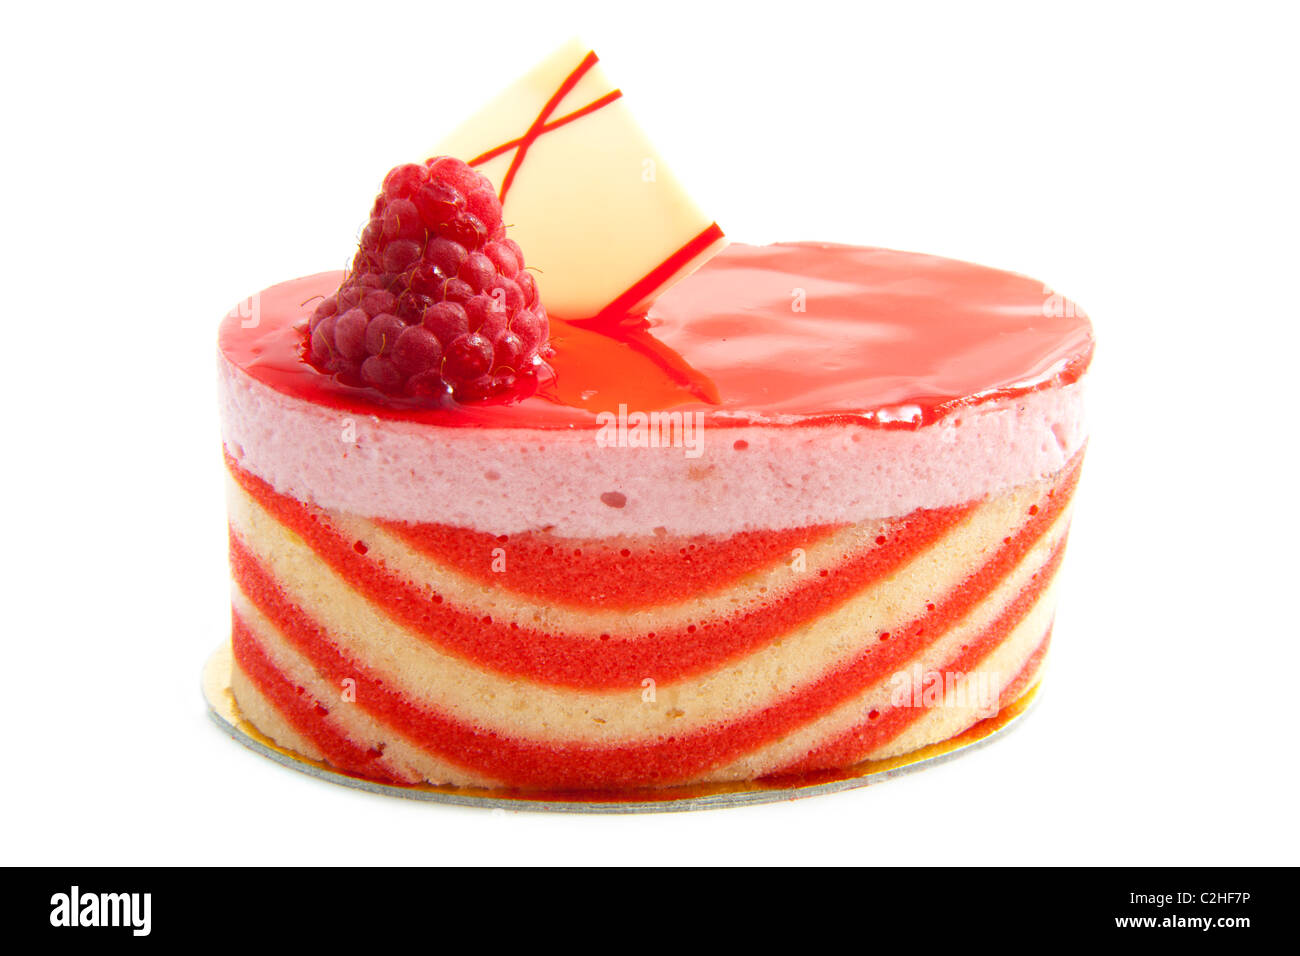 Strawberry pie with piece of white choclate on top of it Stock Photo